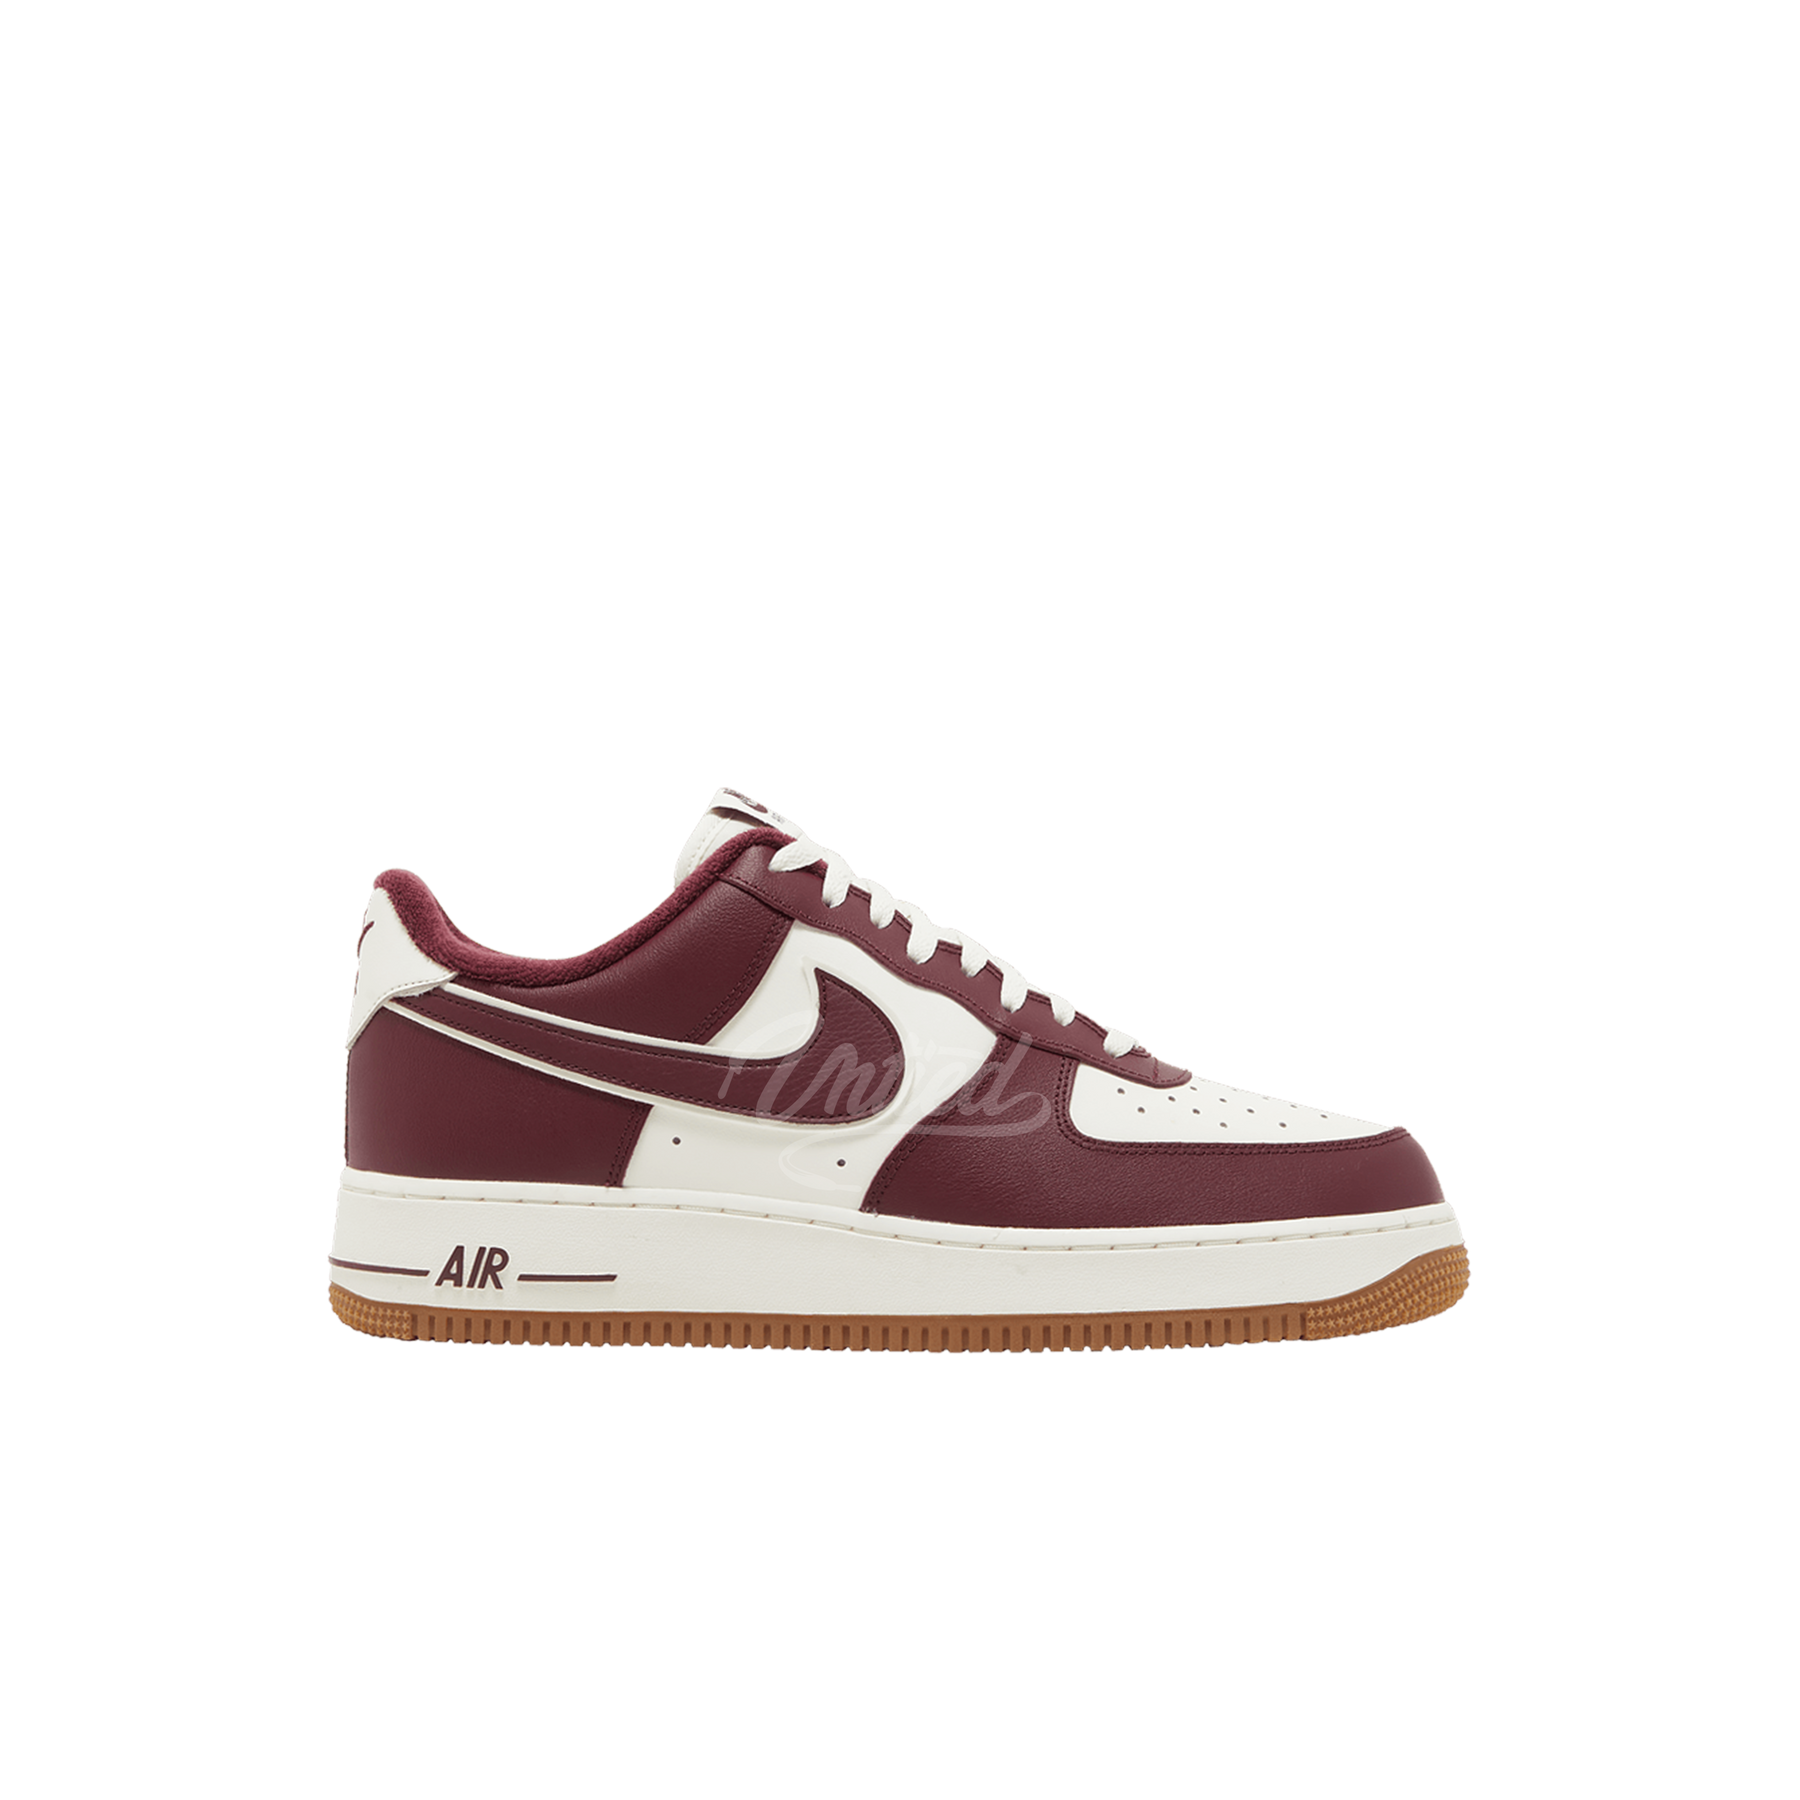 Air Force 1 "College Pack Maroon"